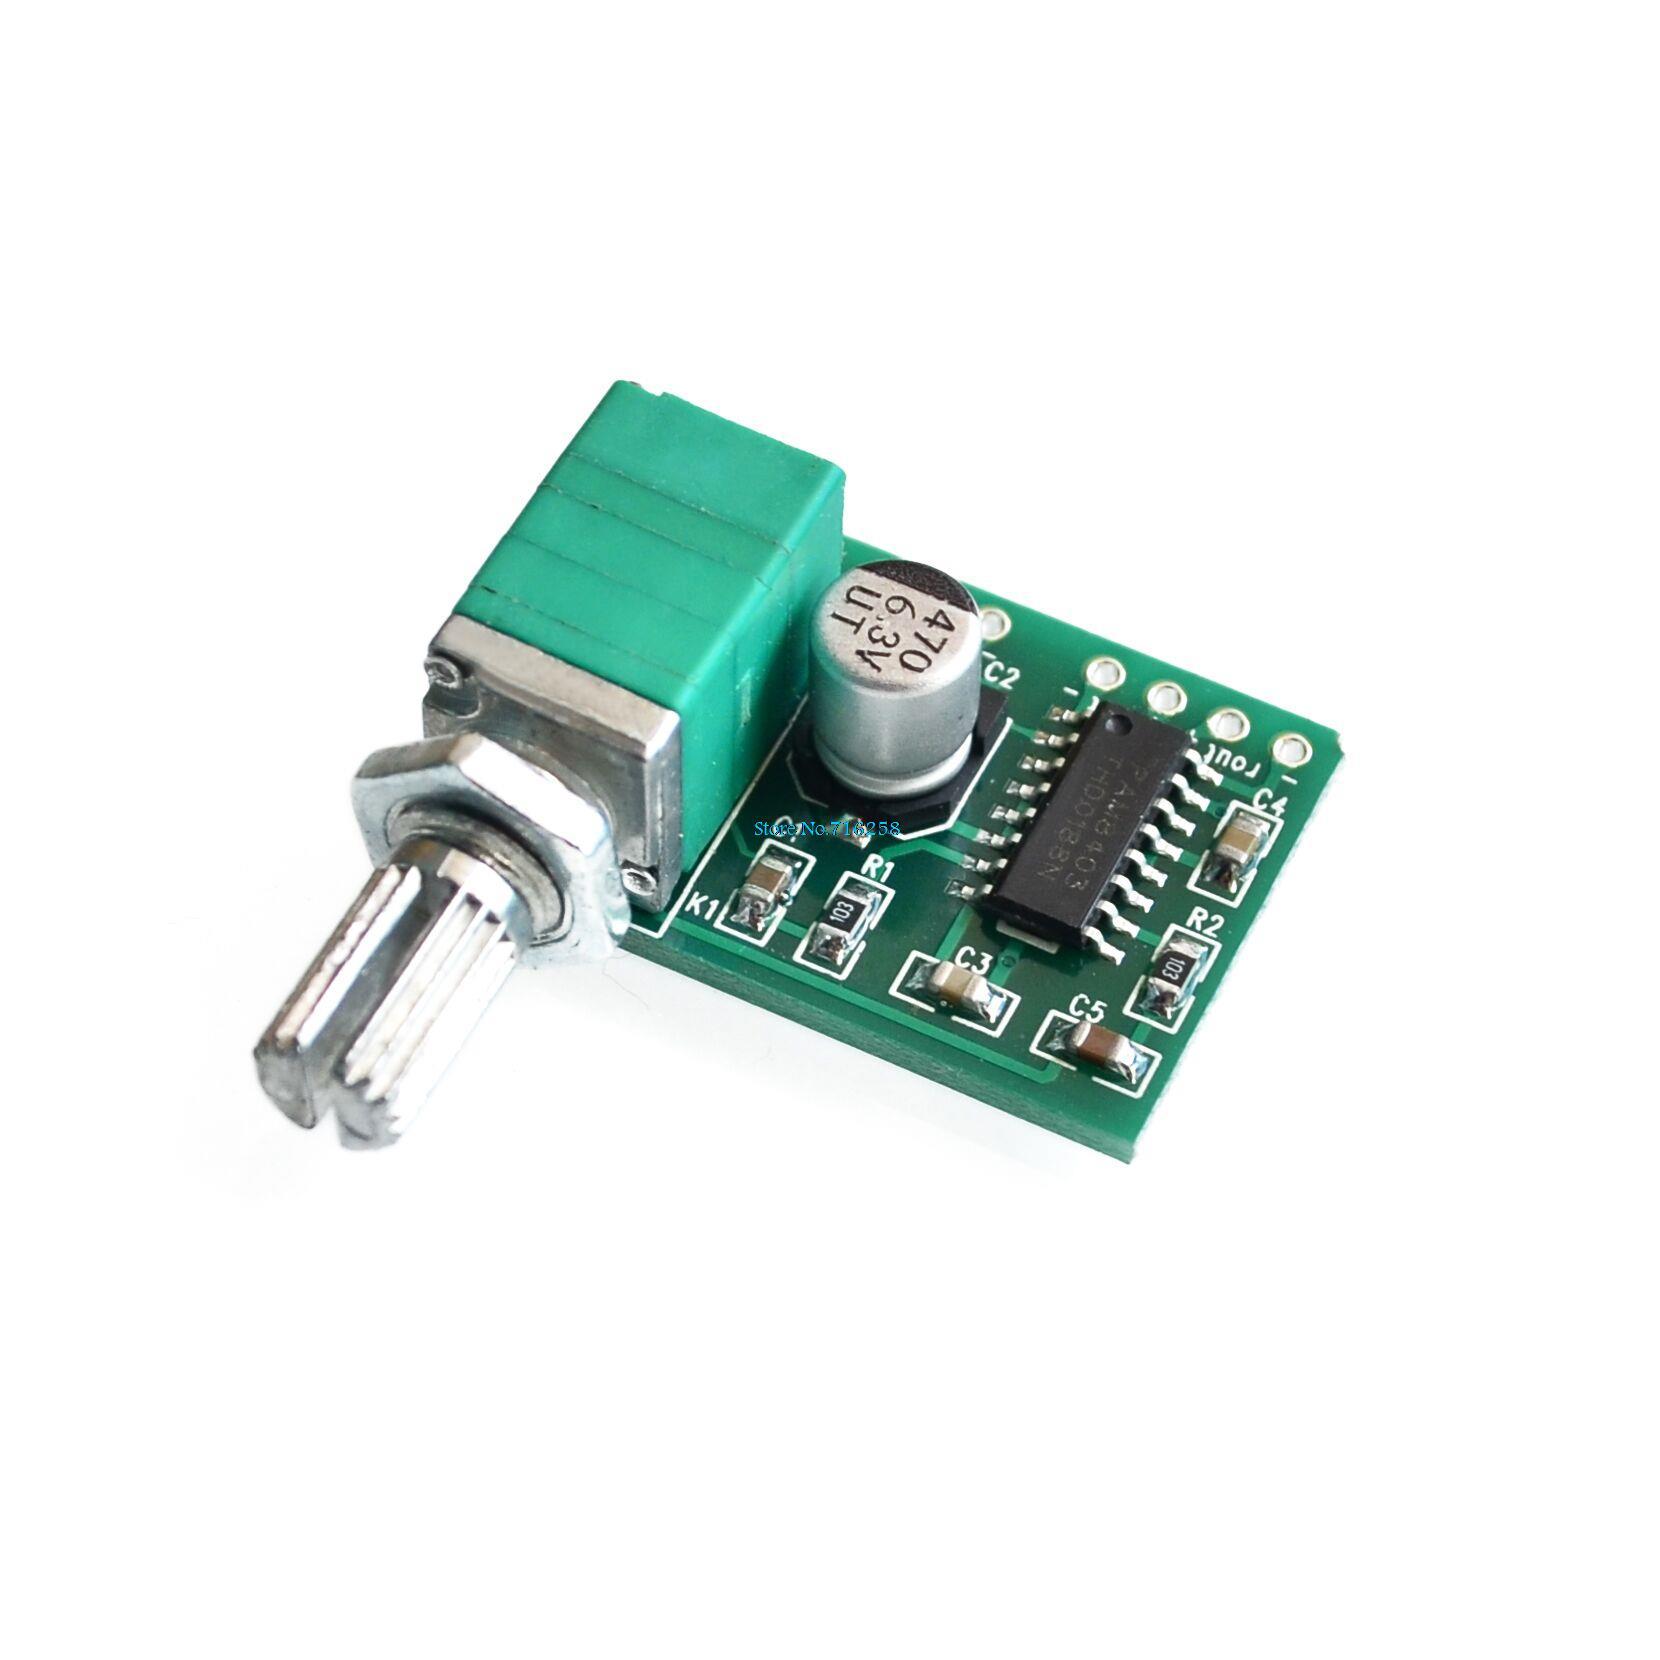 -10pcs-lot-PAM8403-mini-5V-digital-amplifier-board-with-switch-potentiometer-can-be-USB-powered-GF1002